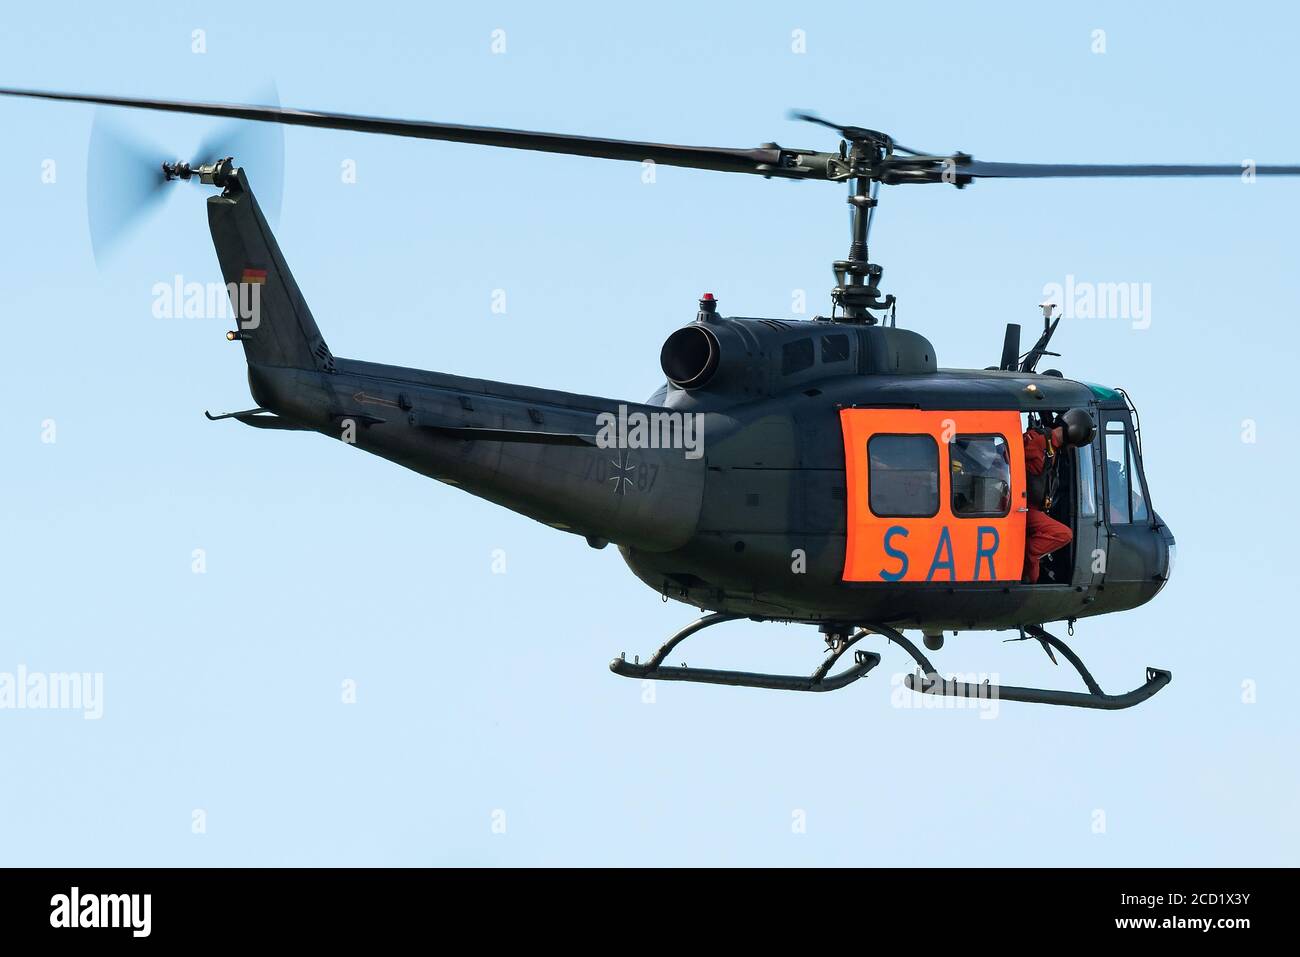 A German Air Force UH-1D Huey helicopter in Search And Rescue (SAR) configuration Stock Photo